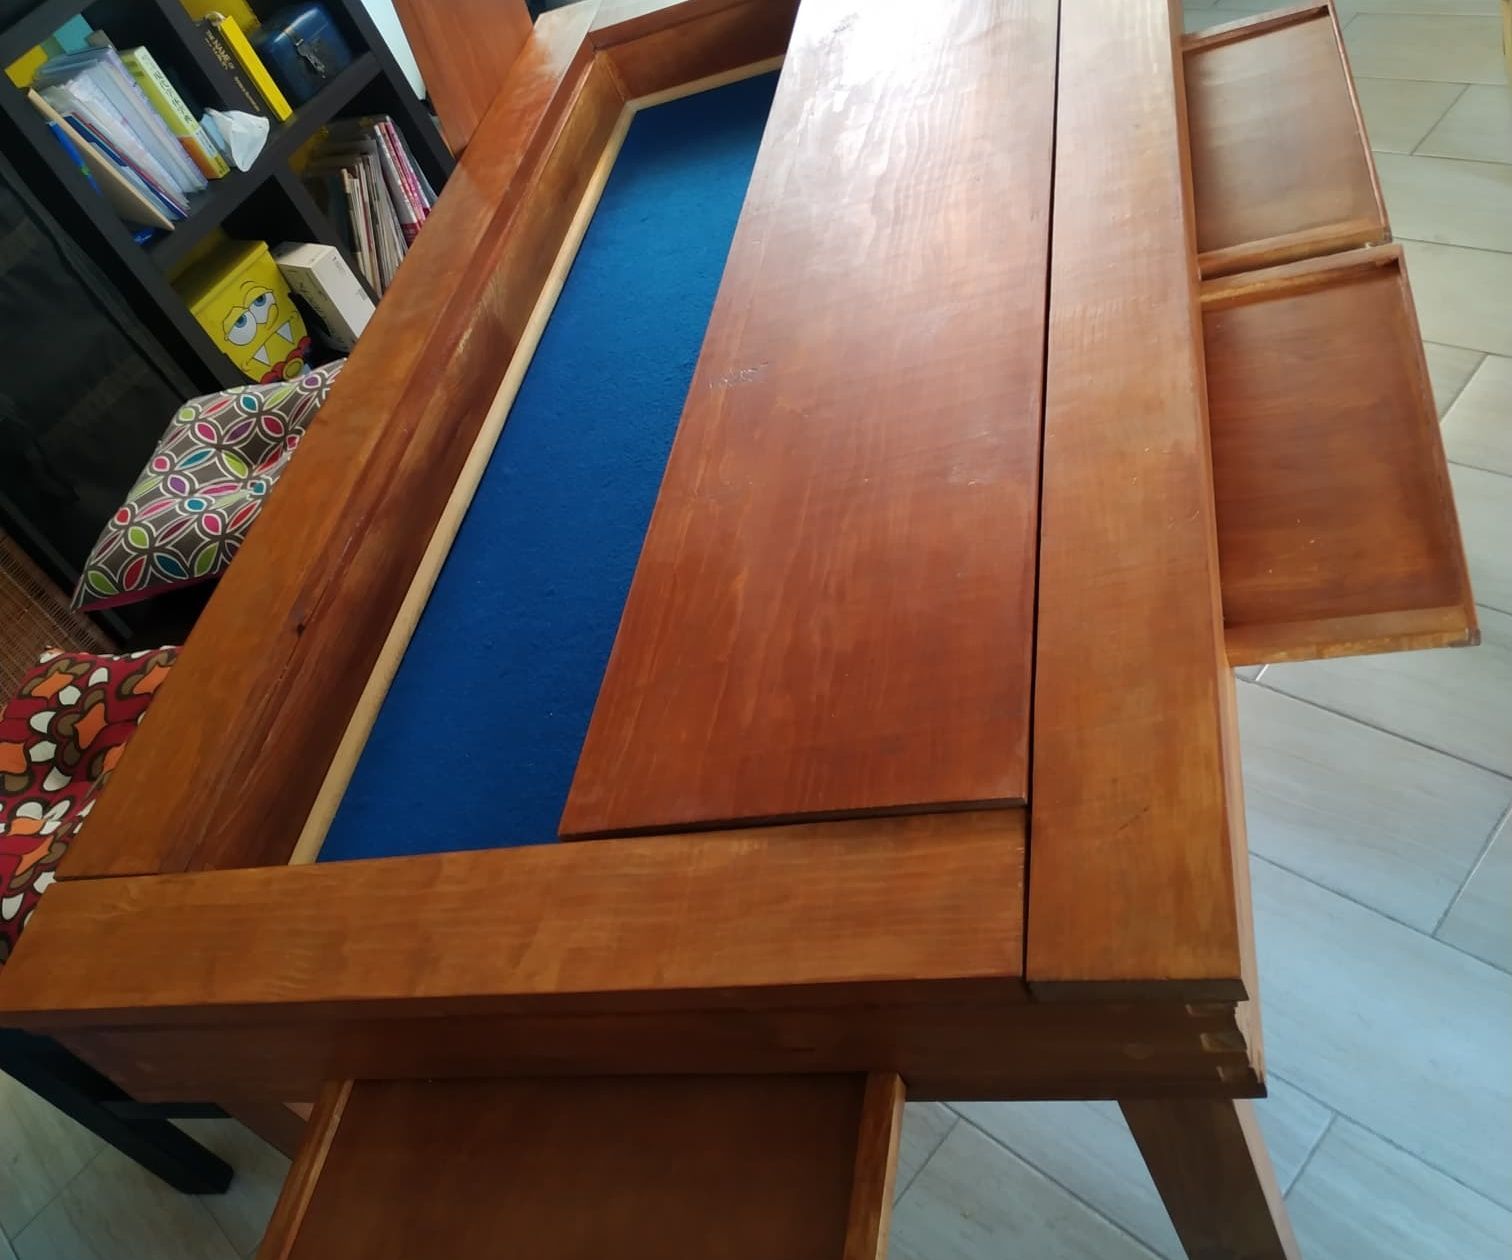 Board Game Table